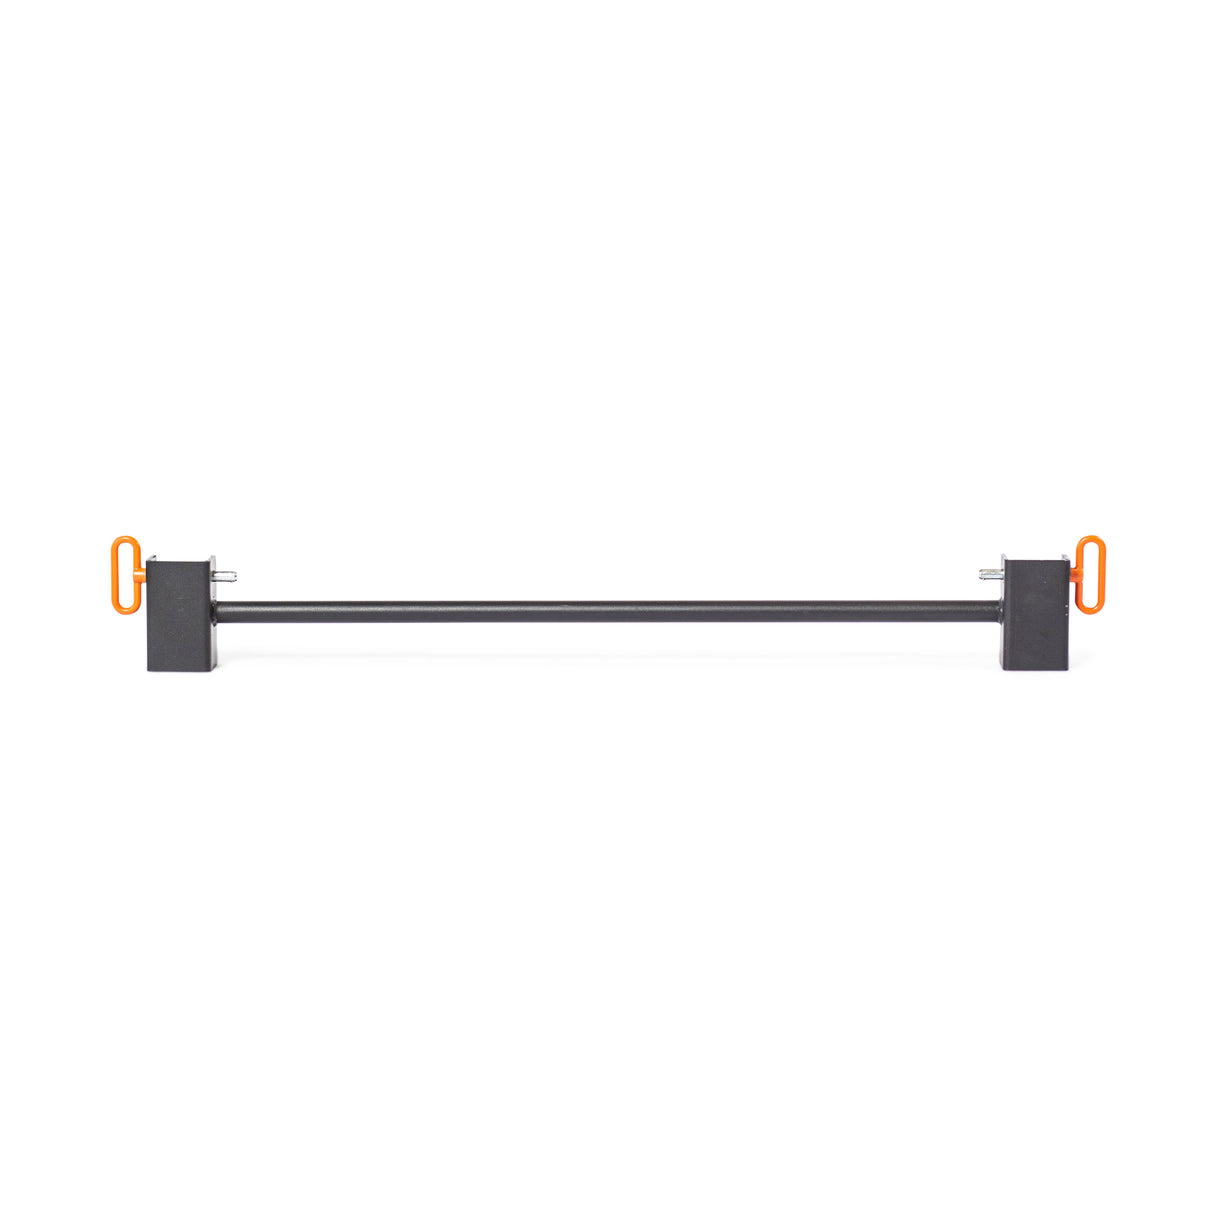 Adjustable Pull-up Bar Rack Attachment